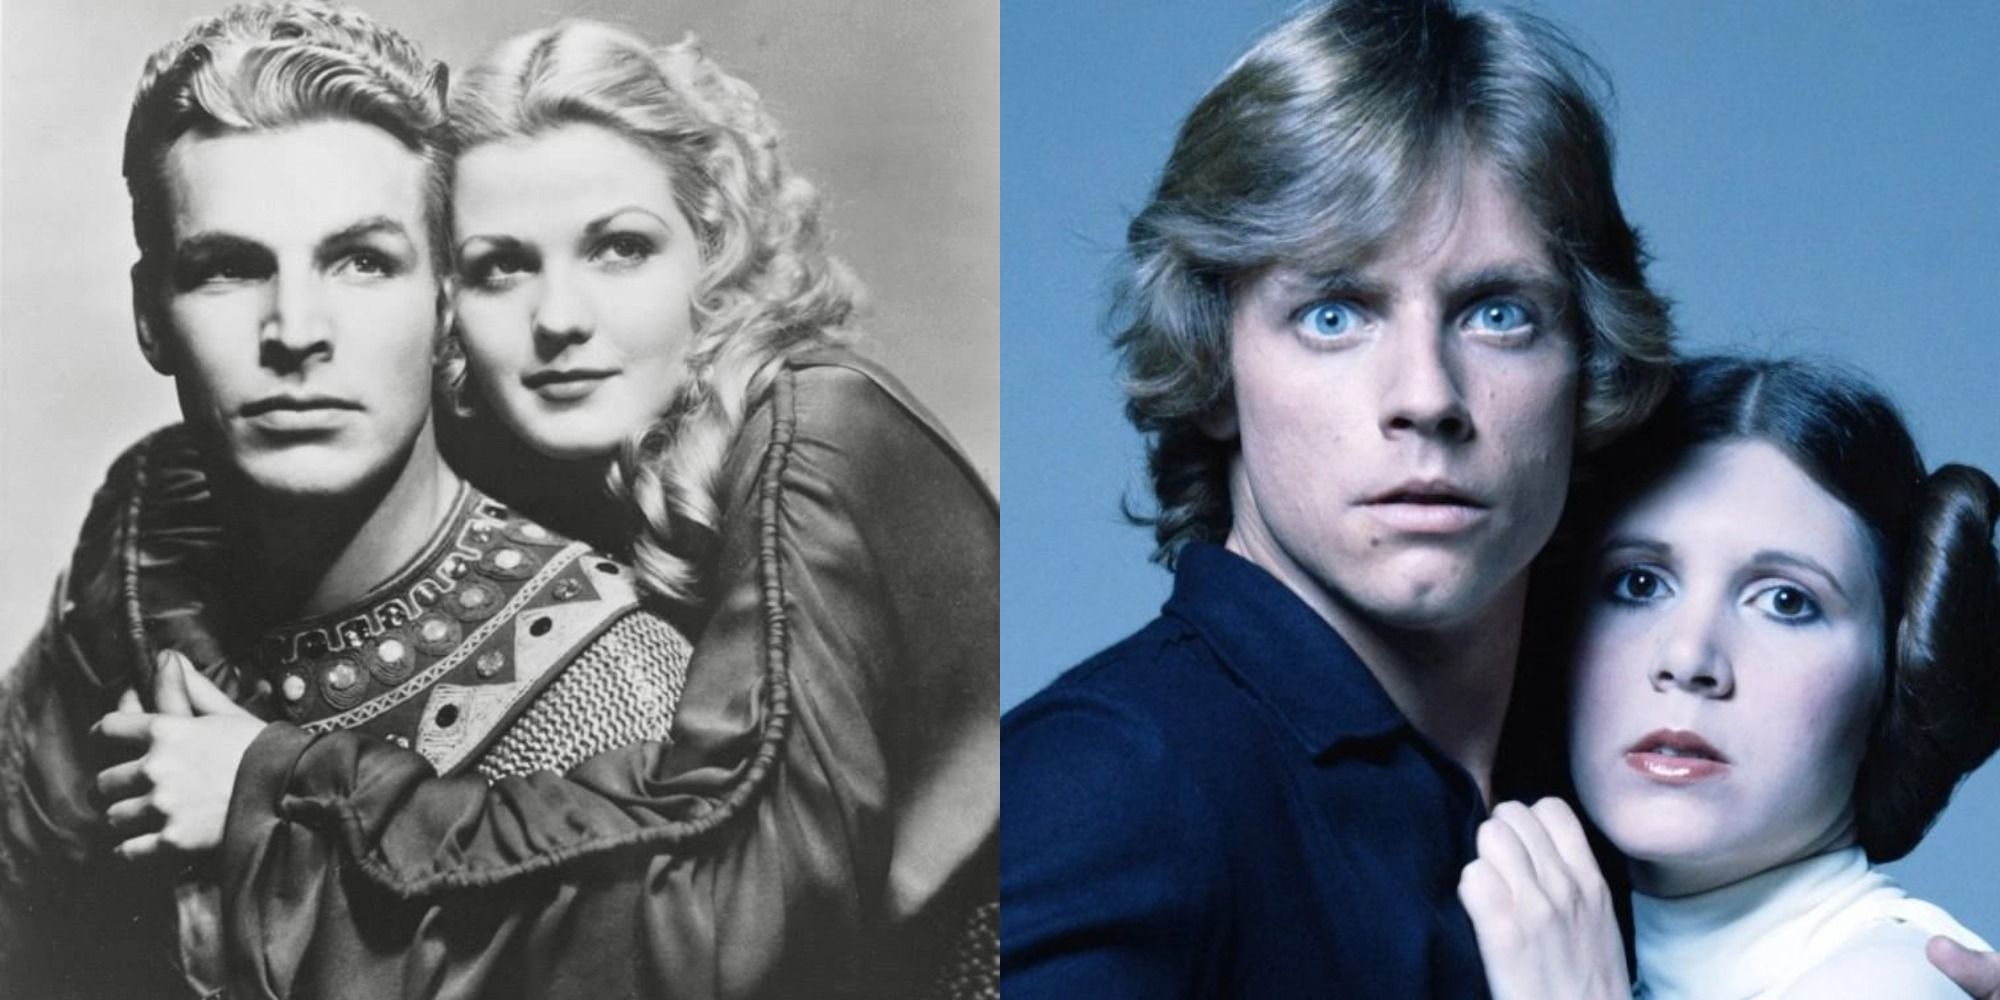 A split image showing Flash Gordon and Dale, and Luke and Leia